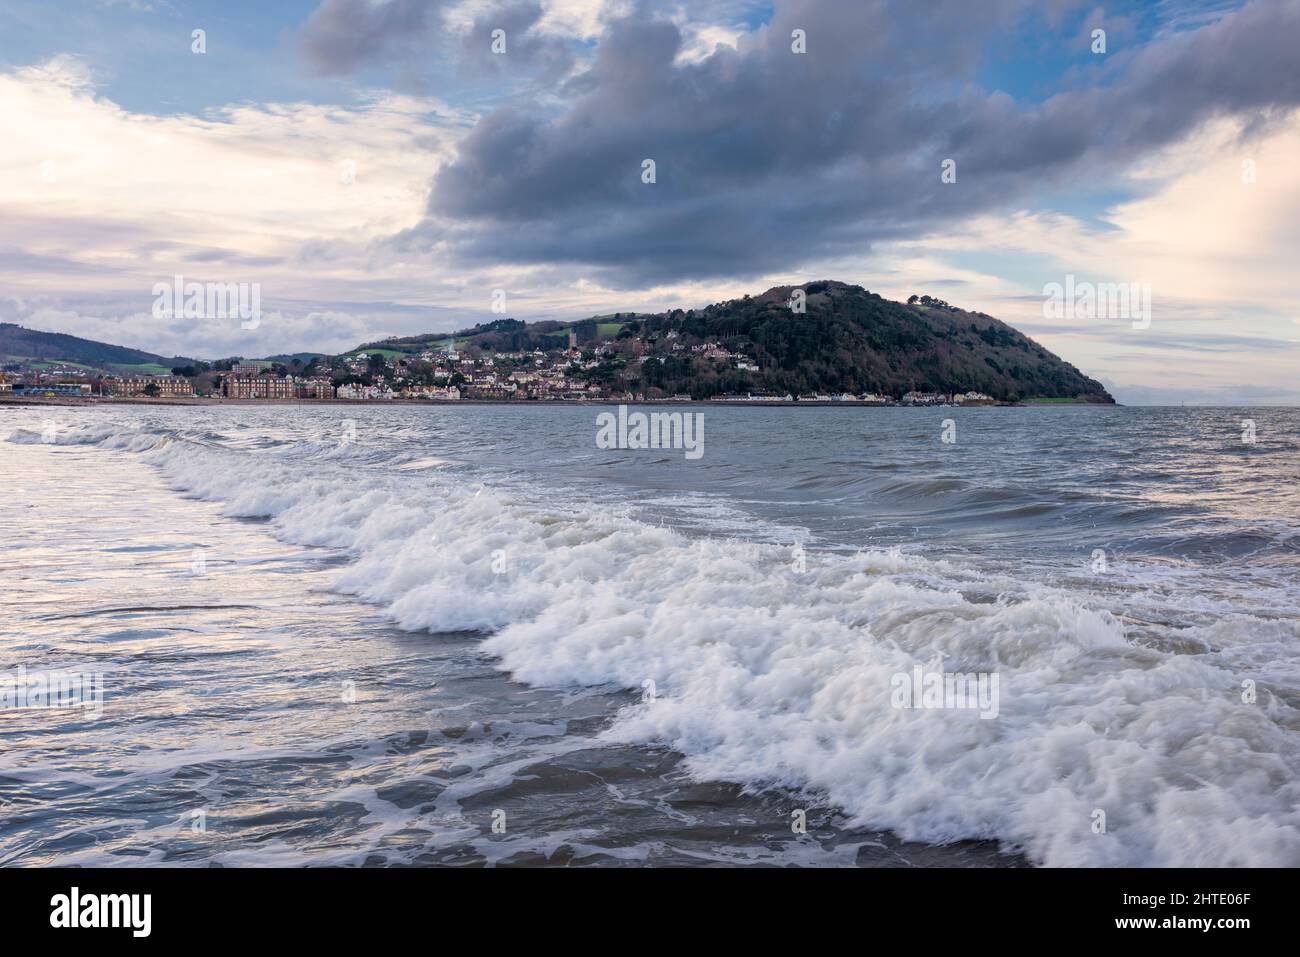 The Strand Beach at Minehead on the Bristol Channel with North Hill beyond, Somerset, England. Stock Photo